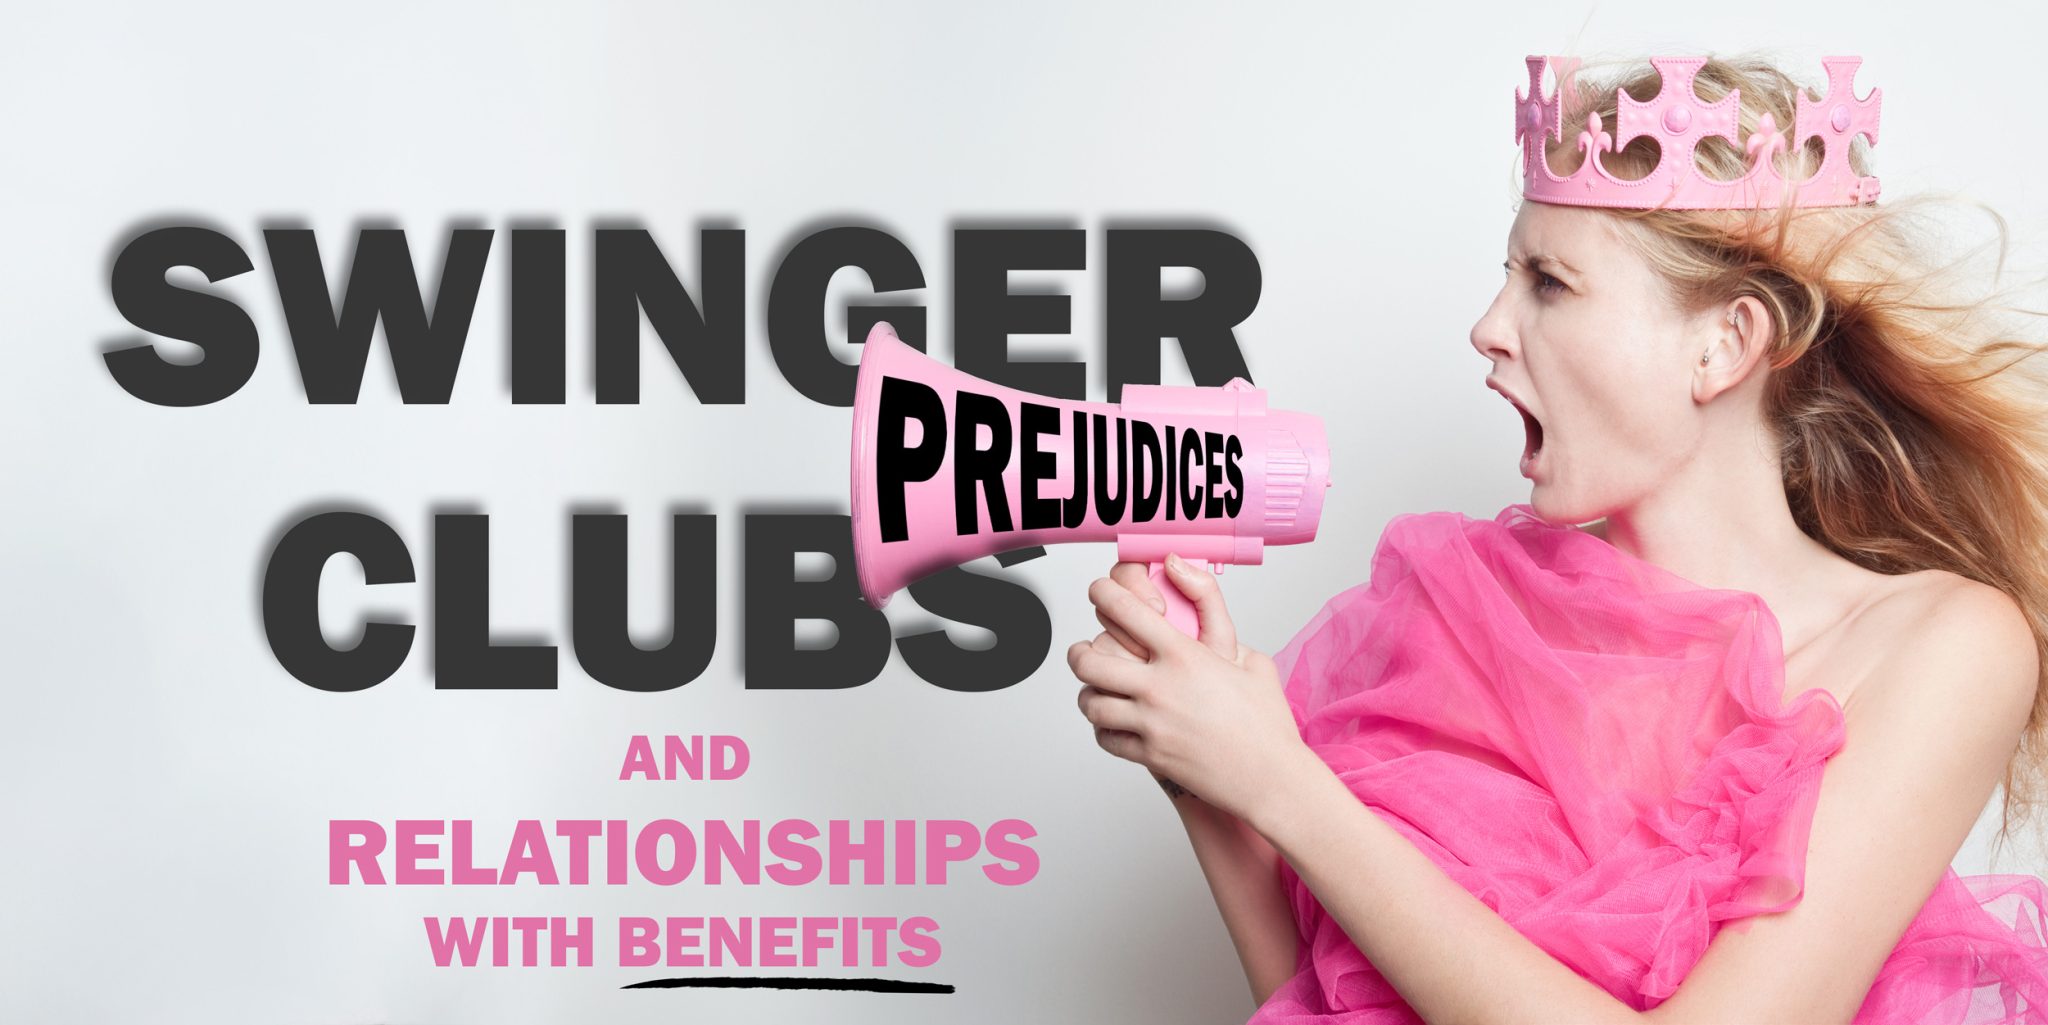 Prejudices about swinger clubs and relationships with benefits - pic